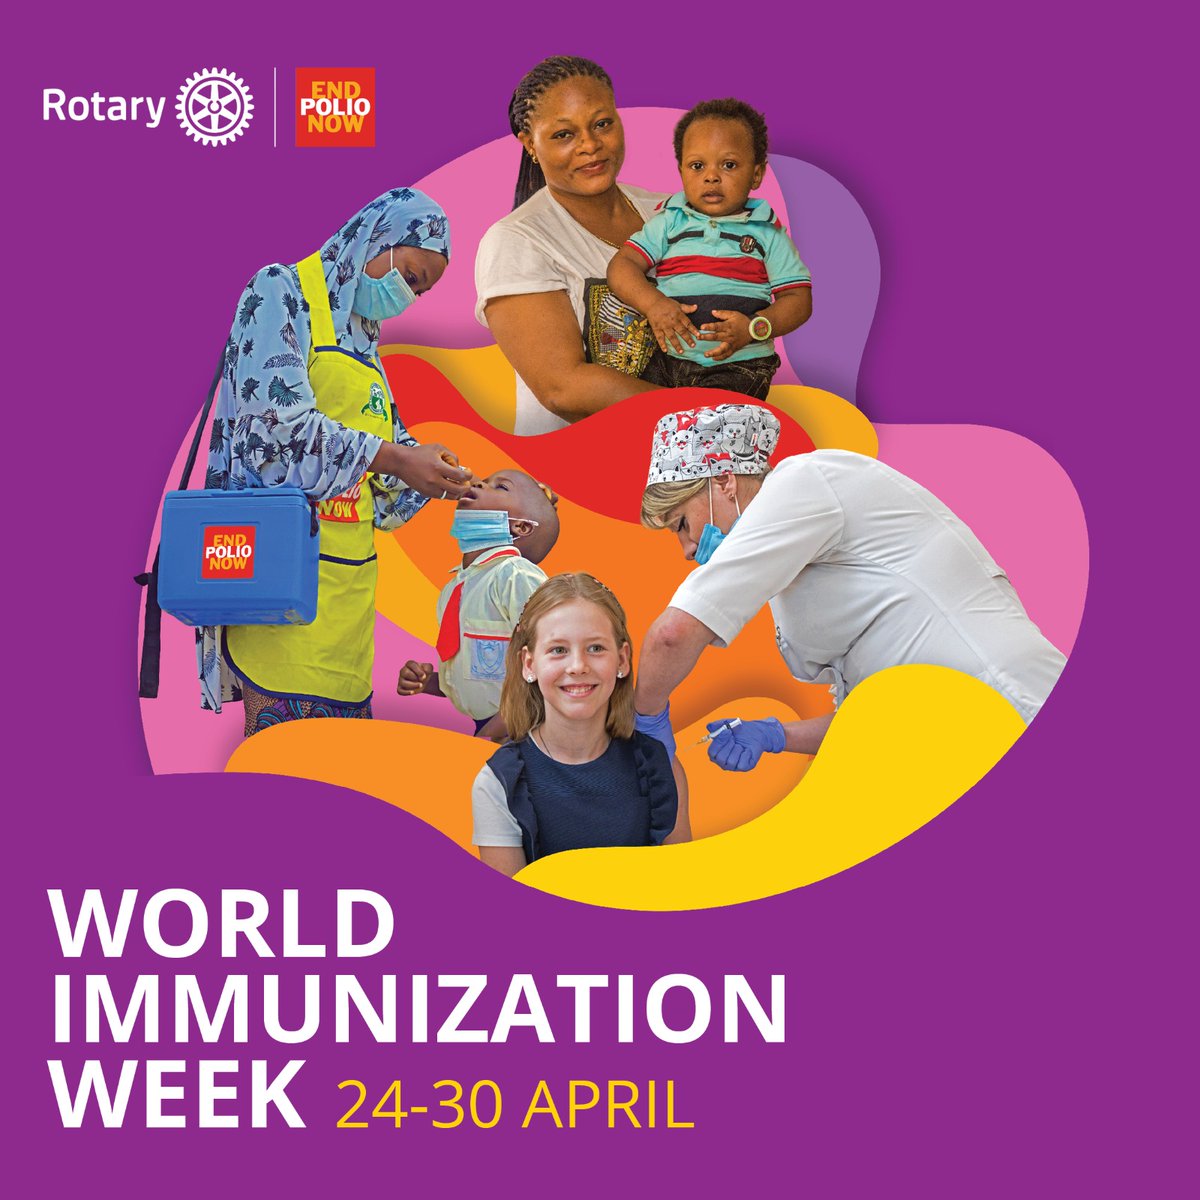 At RC Bwebajja, we are committed to ending polio in this world. Celebrating World Immunisation Week Apr 24-30. #EndPolio
 #VaccinesWork
 #Rotary